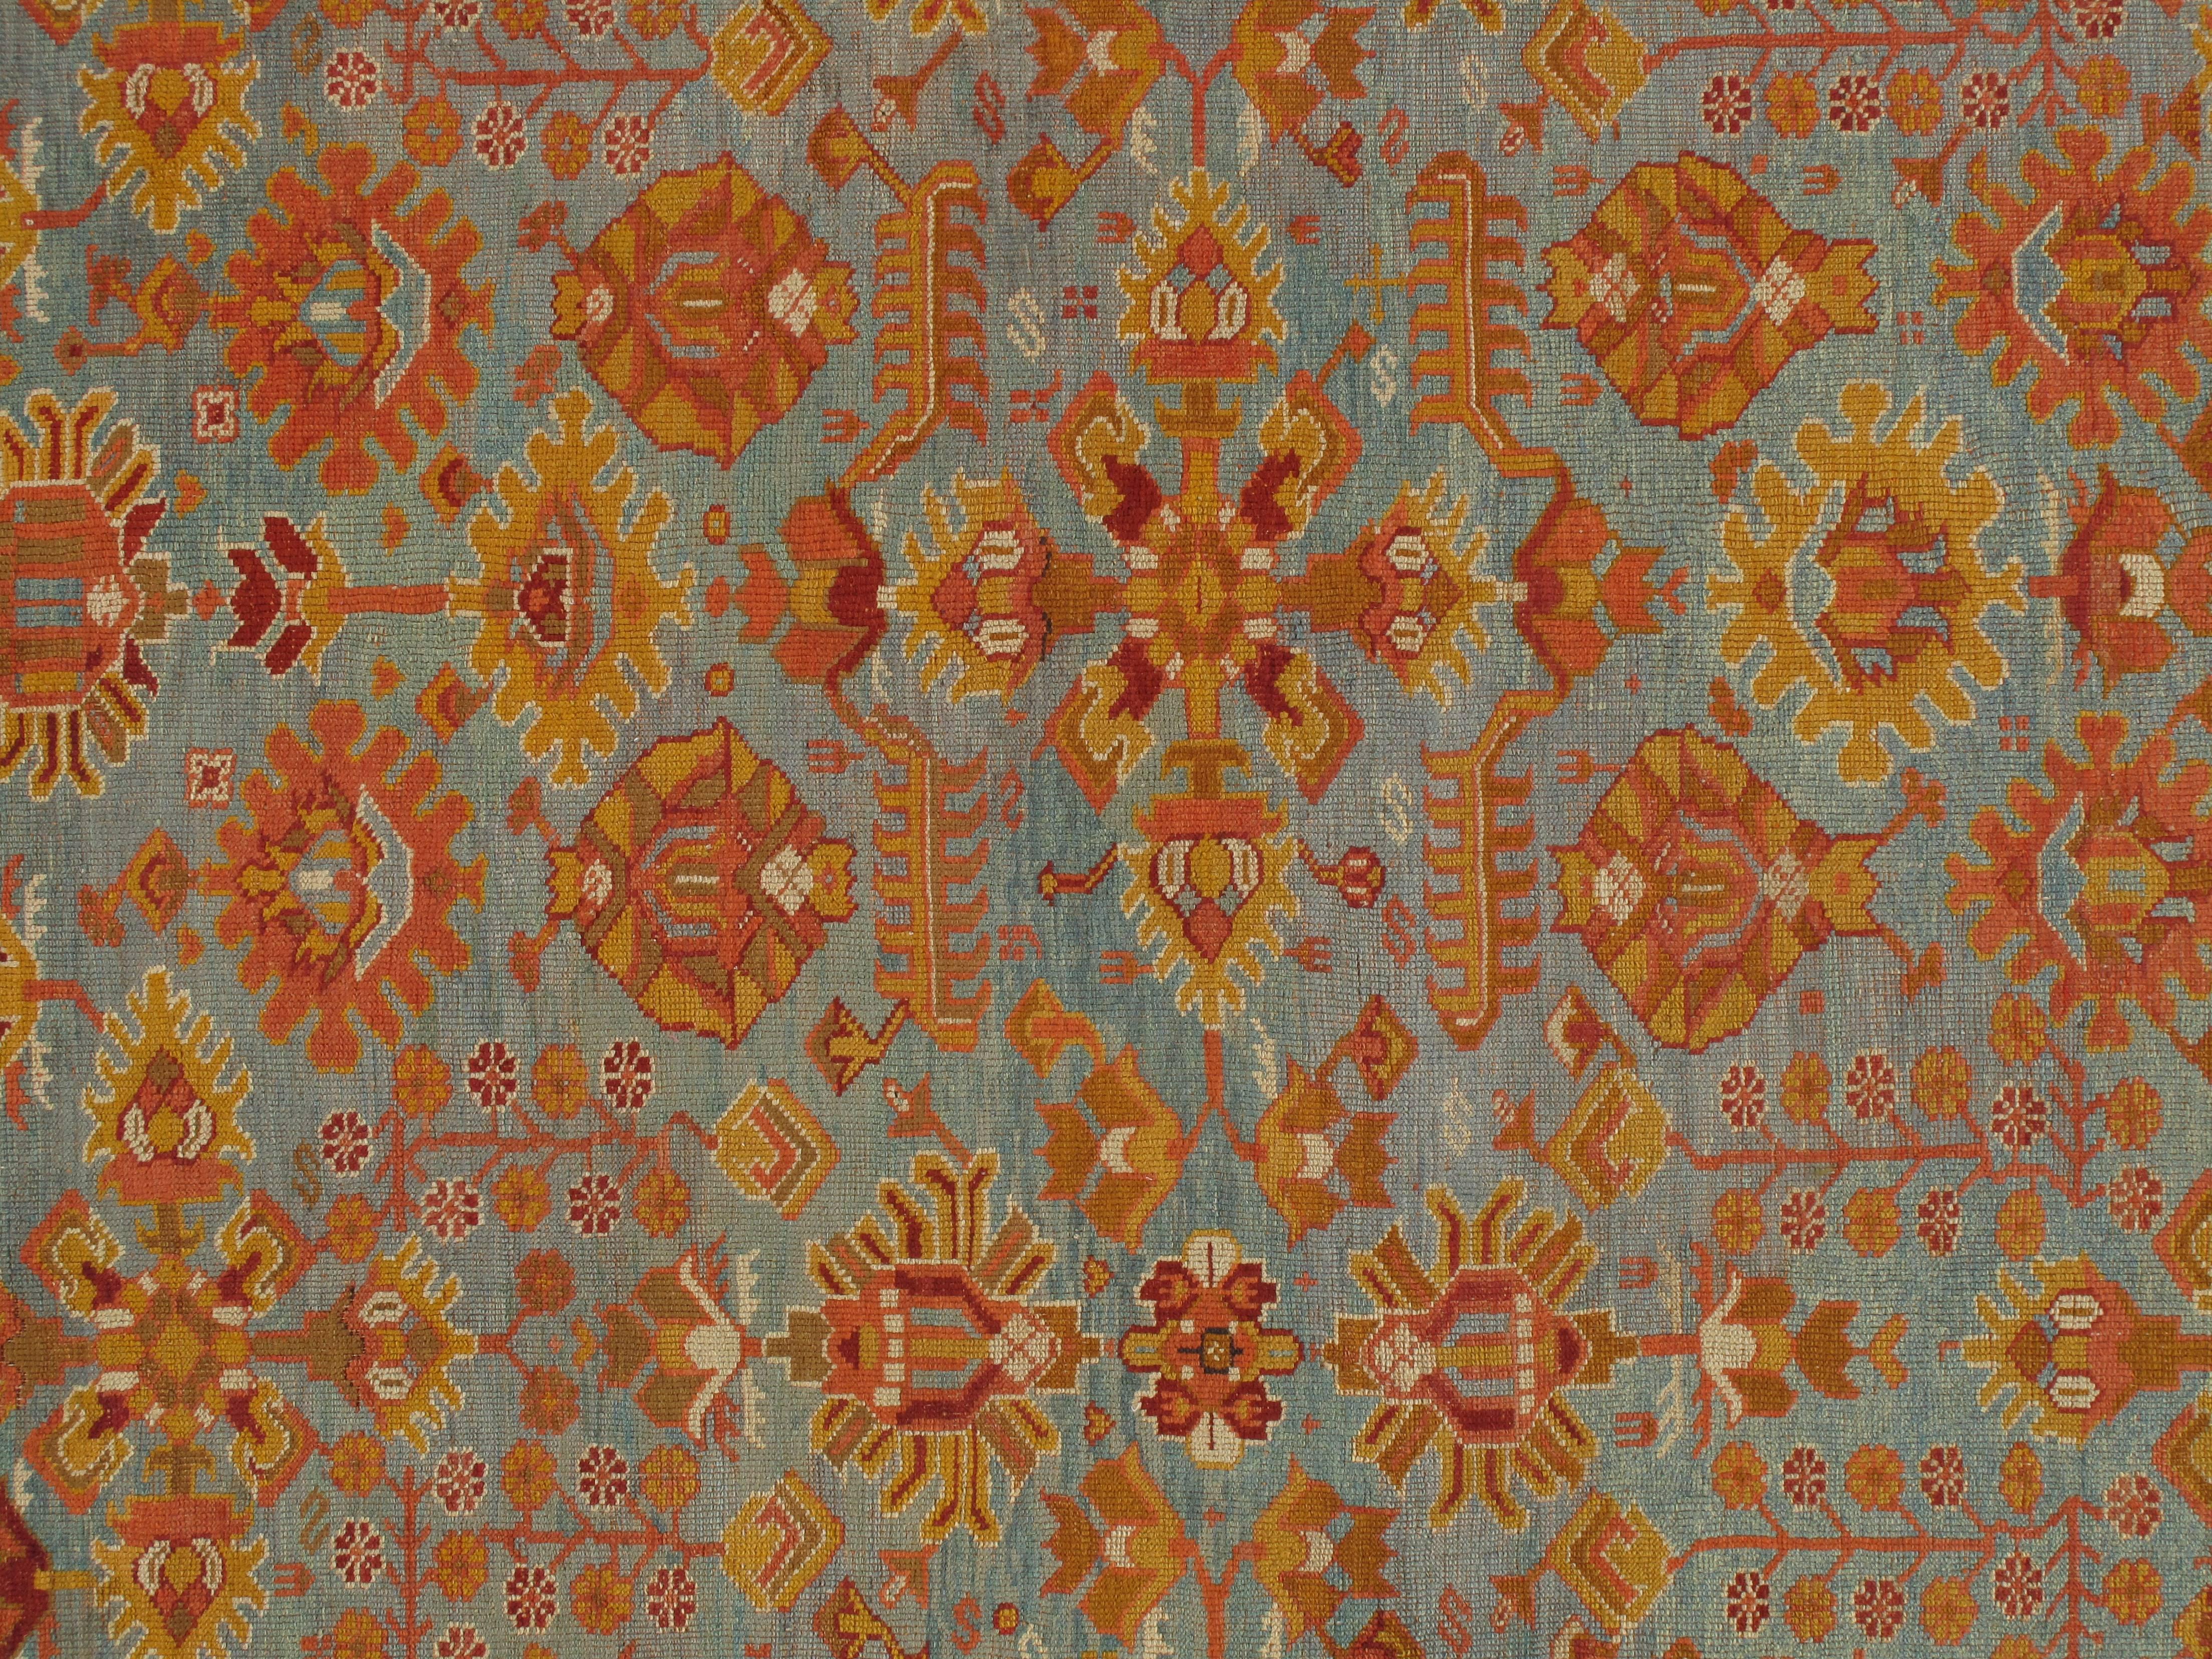 Turkish carpet from Oushak with a combination of soft colors having an all-over design. Finely woven, having the most superb wool found in the mountains of Anatolia. This is a fine example of a antique Oushak. Please contact us for more information.